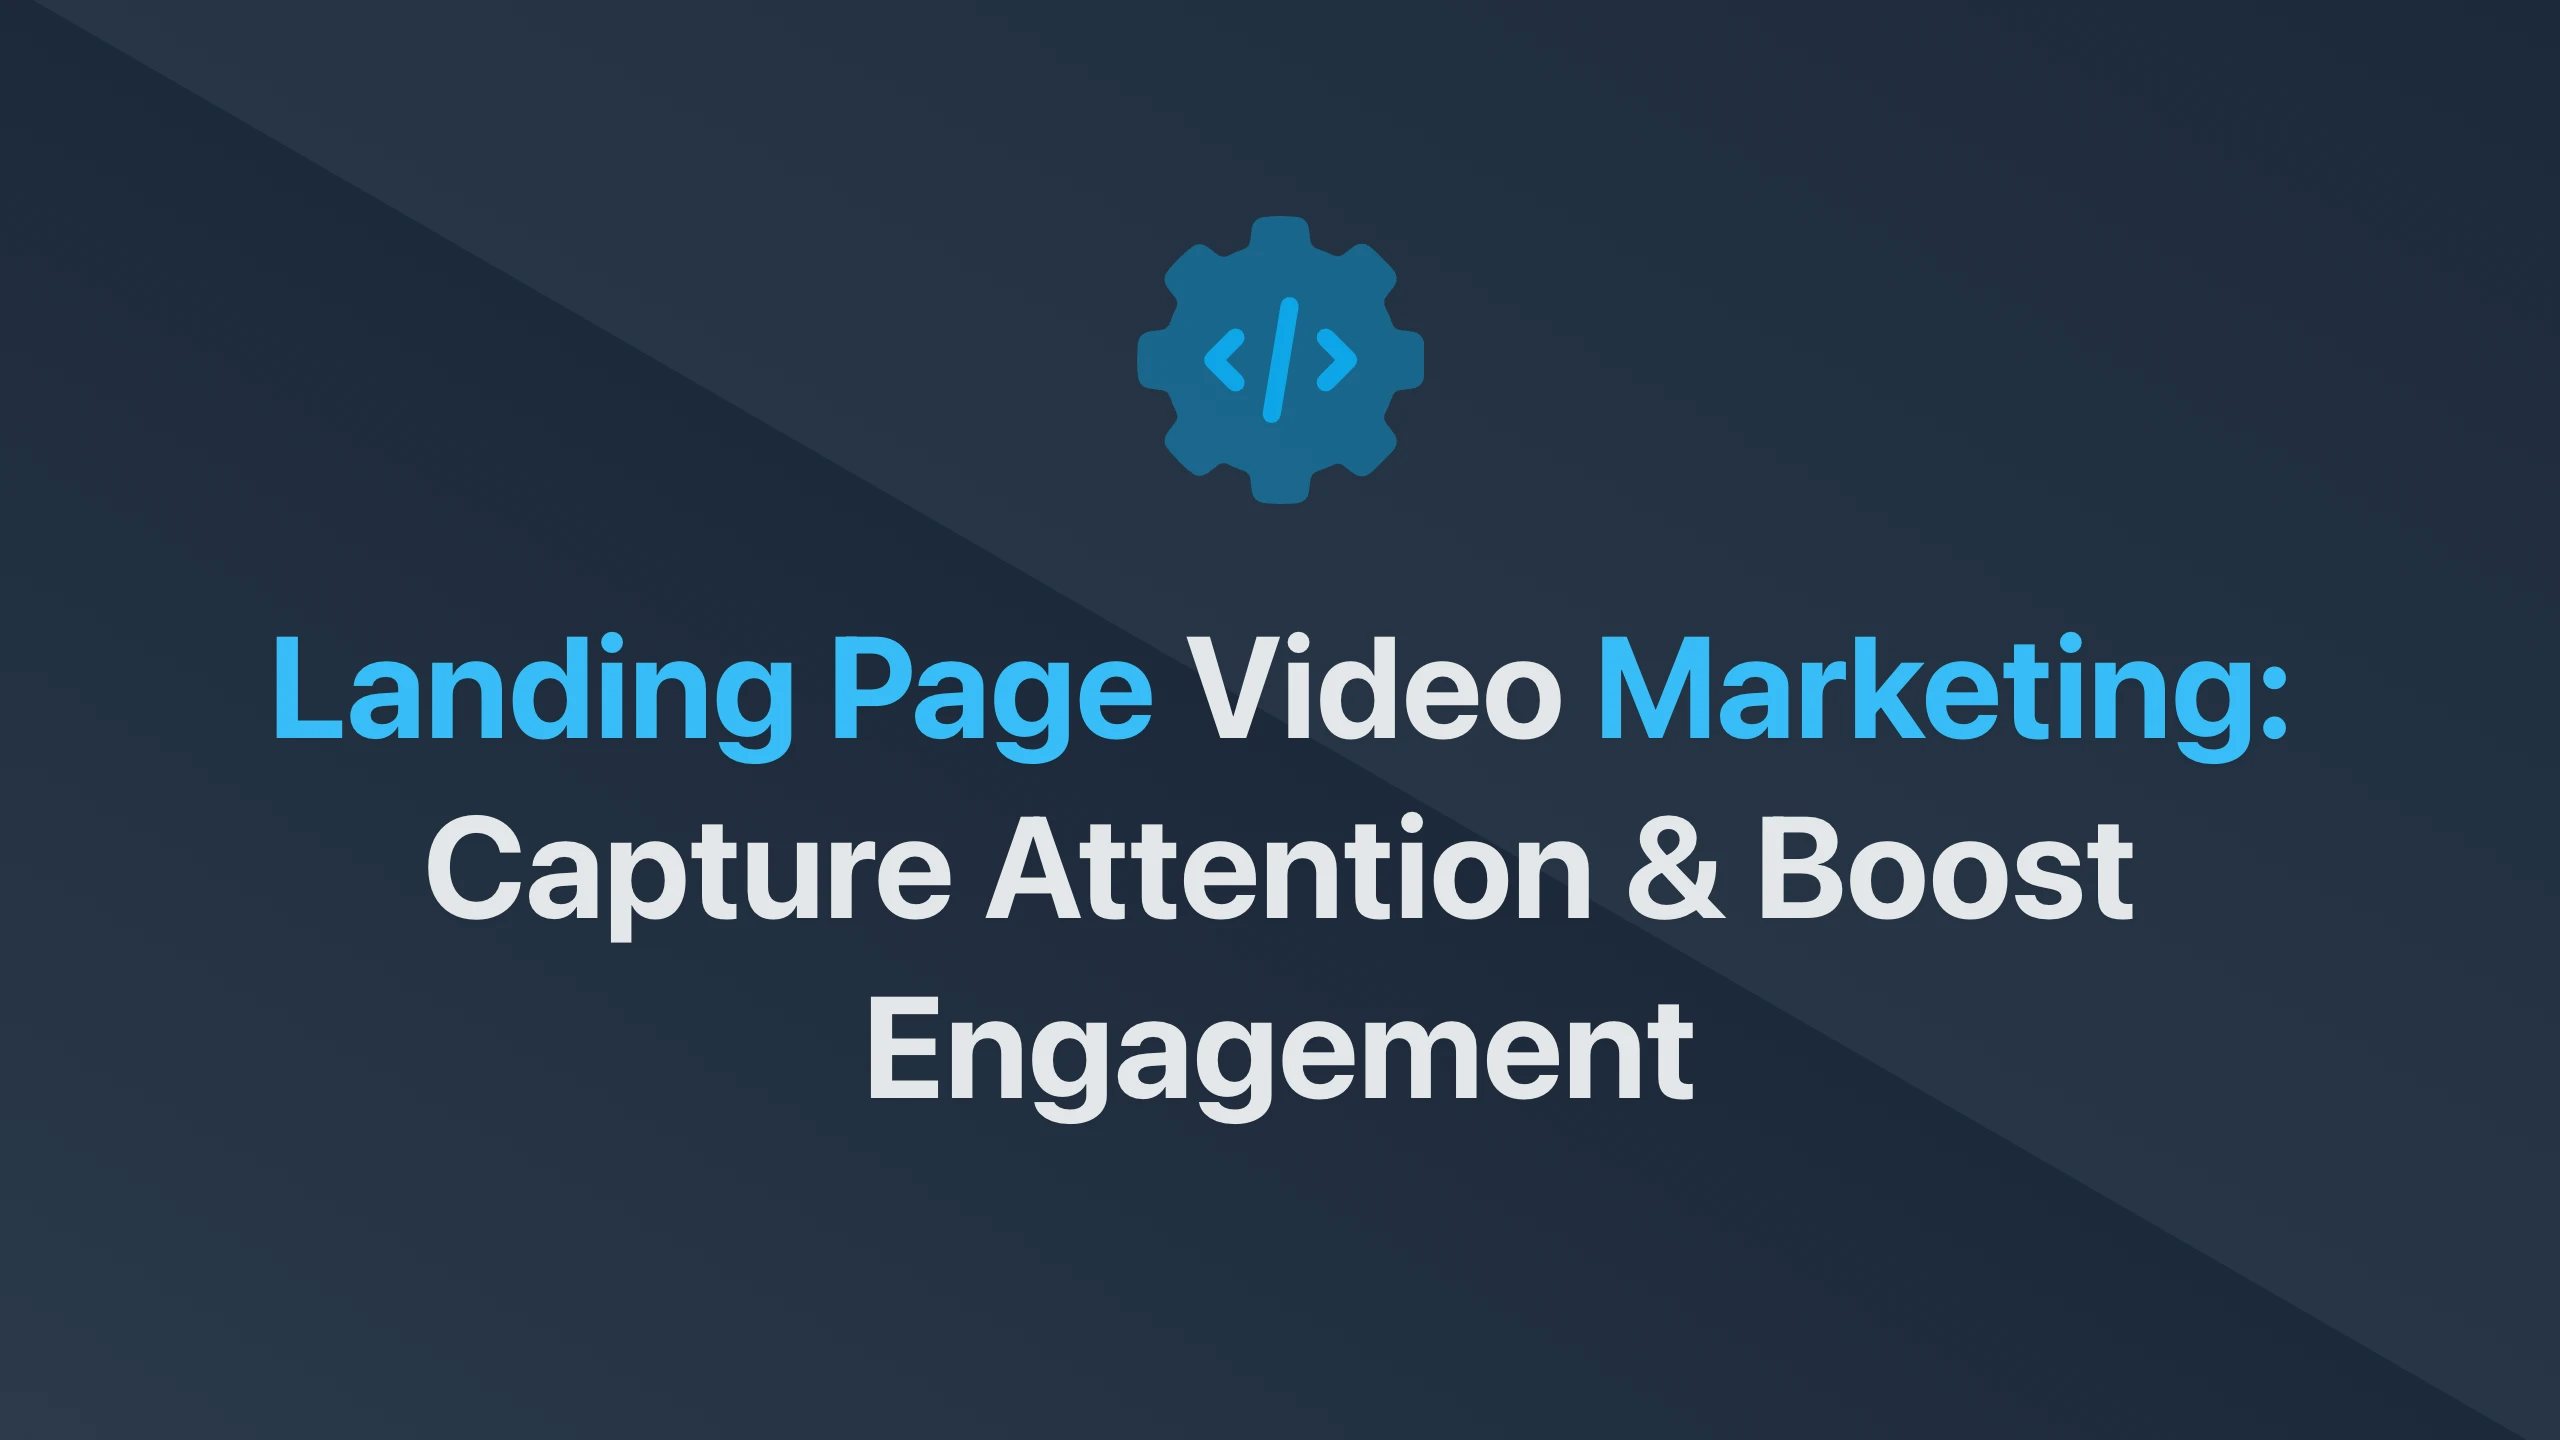 Cover Image for Landing Page Video Marketing: Capture Attention & Boost Engagement